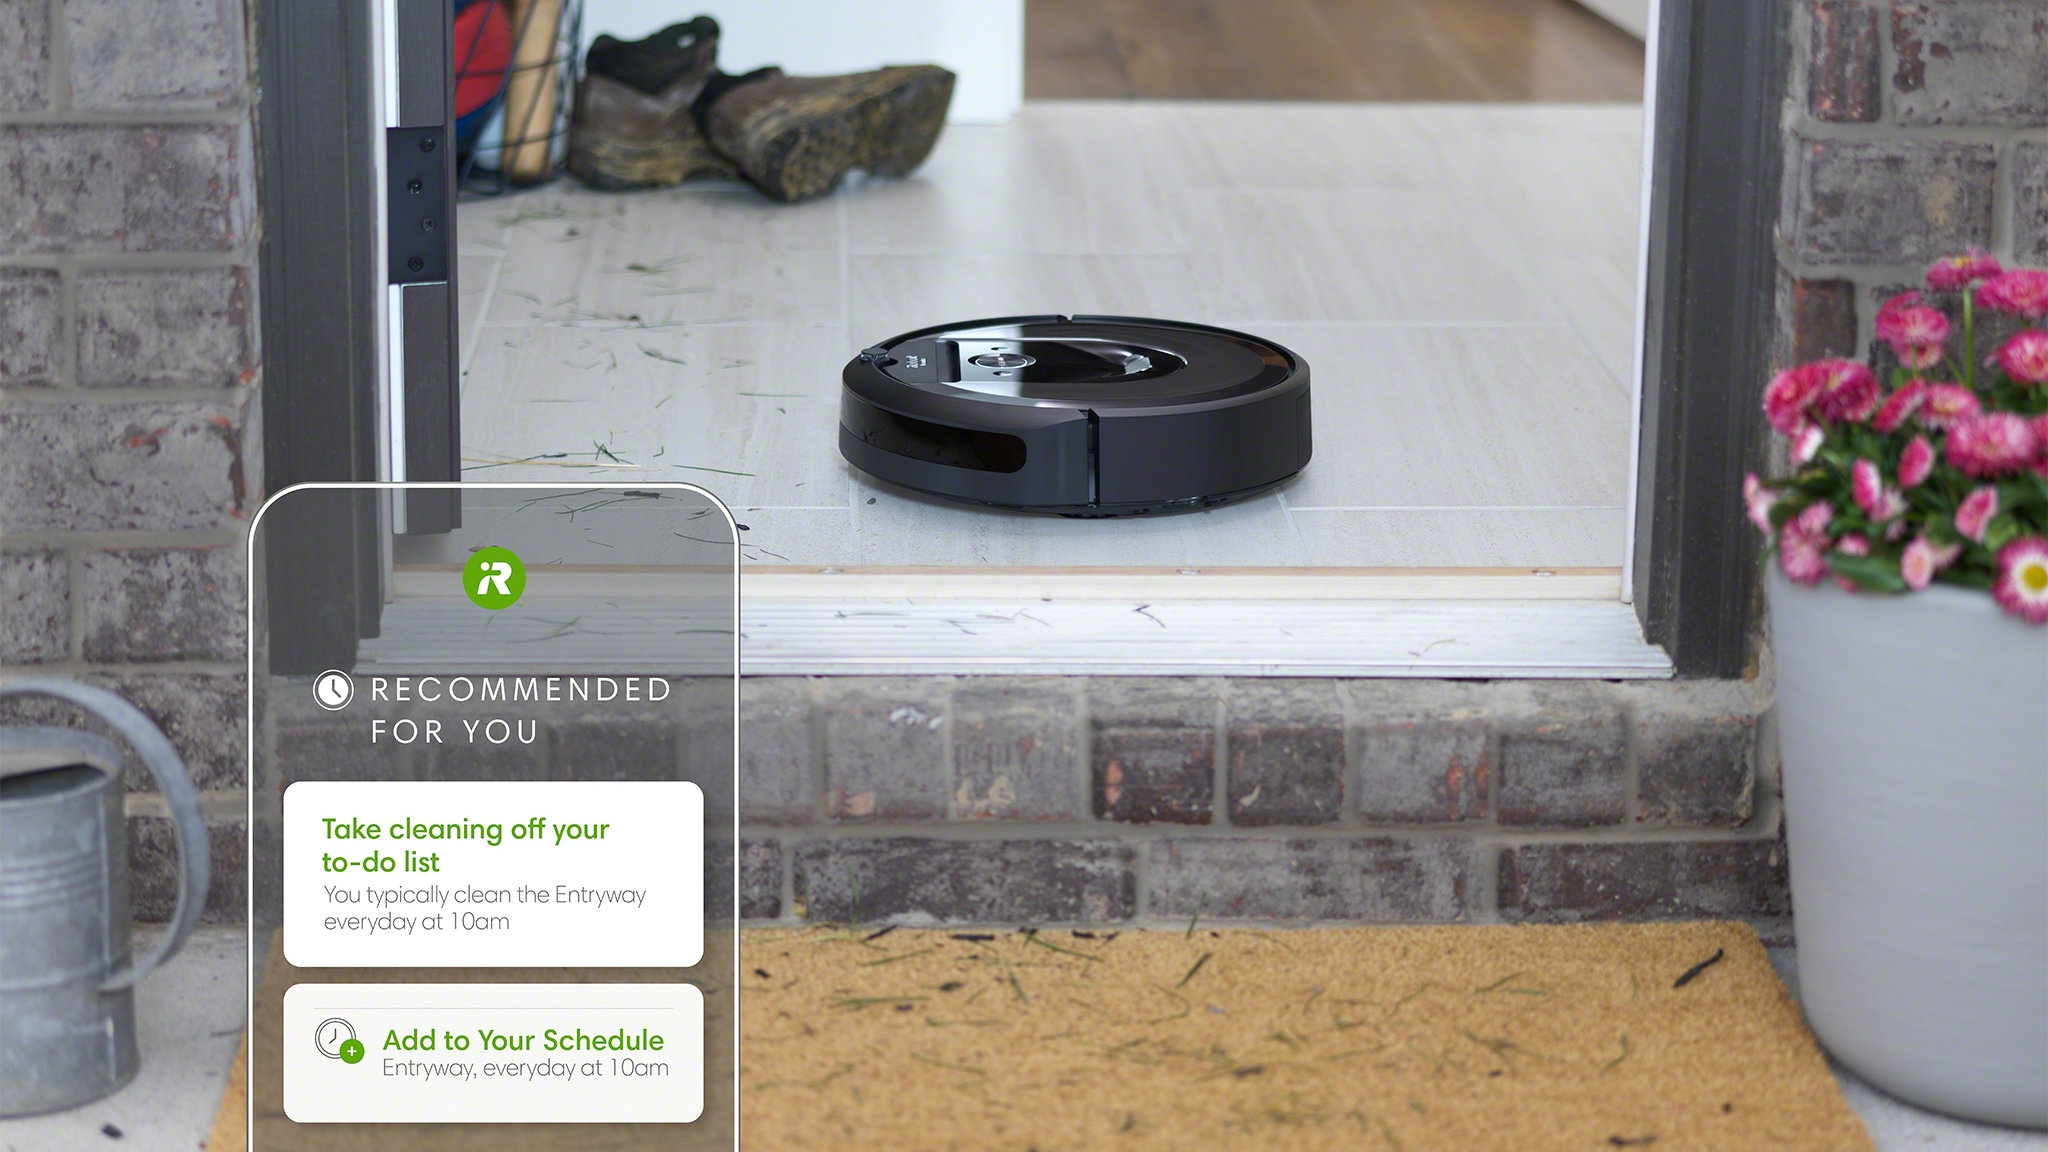 More than just vacuums: iRobot is building the platform for the robots of future Protocol